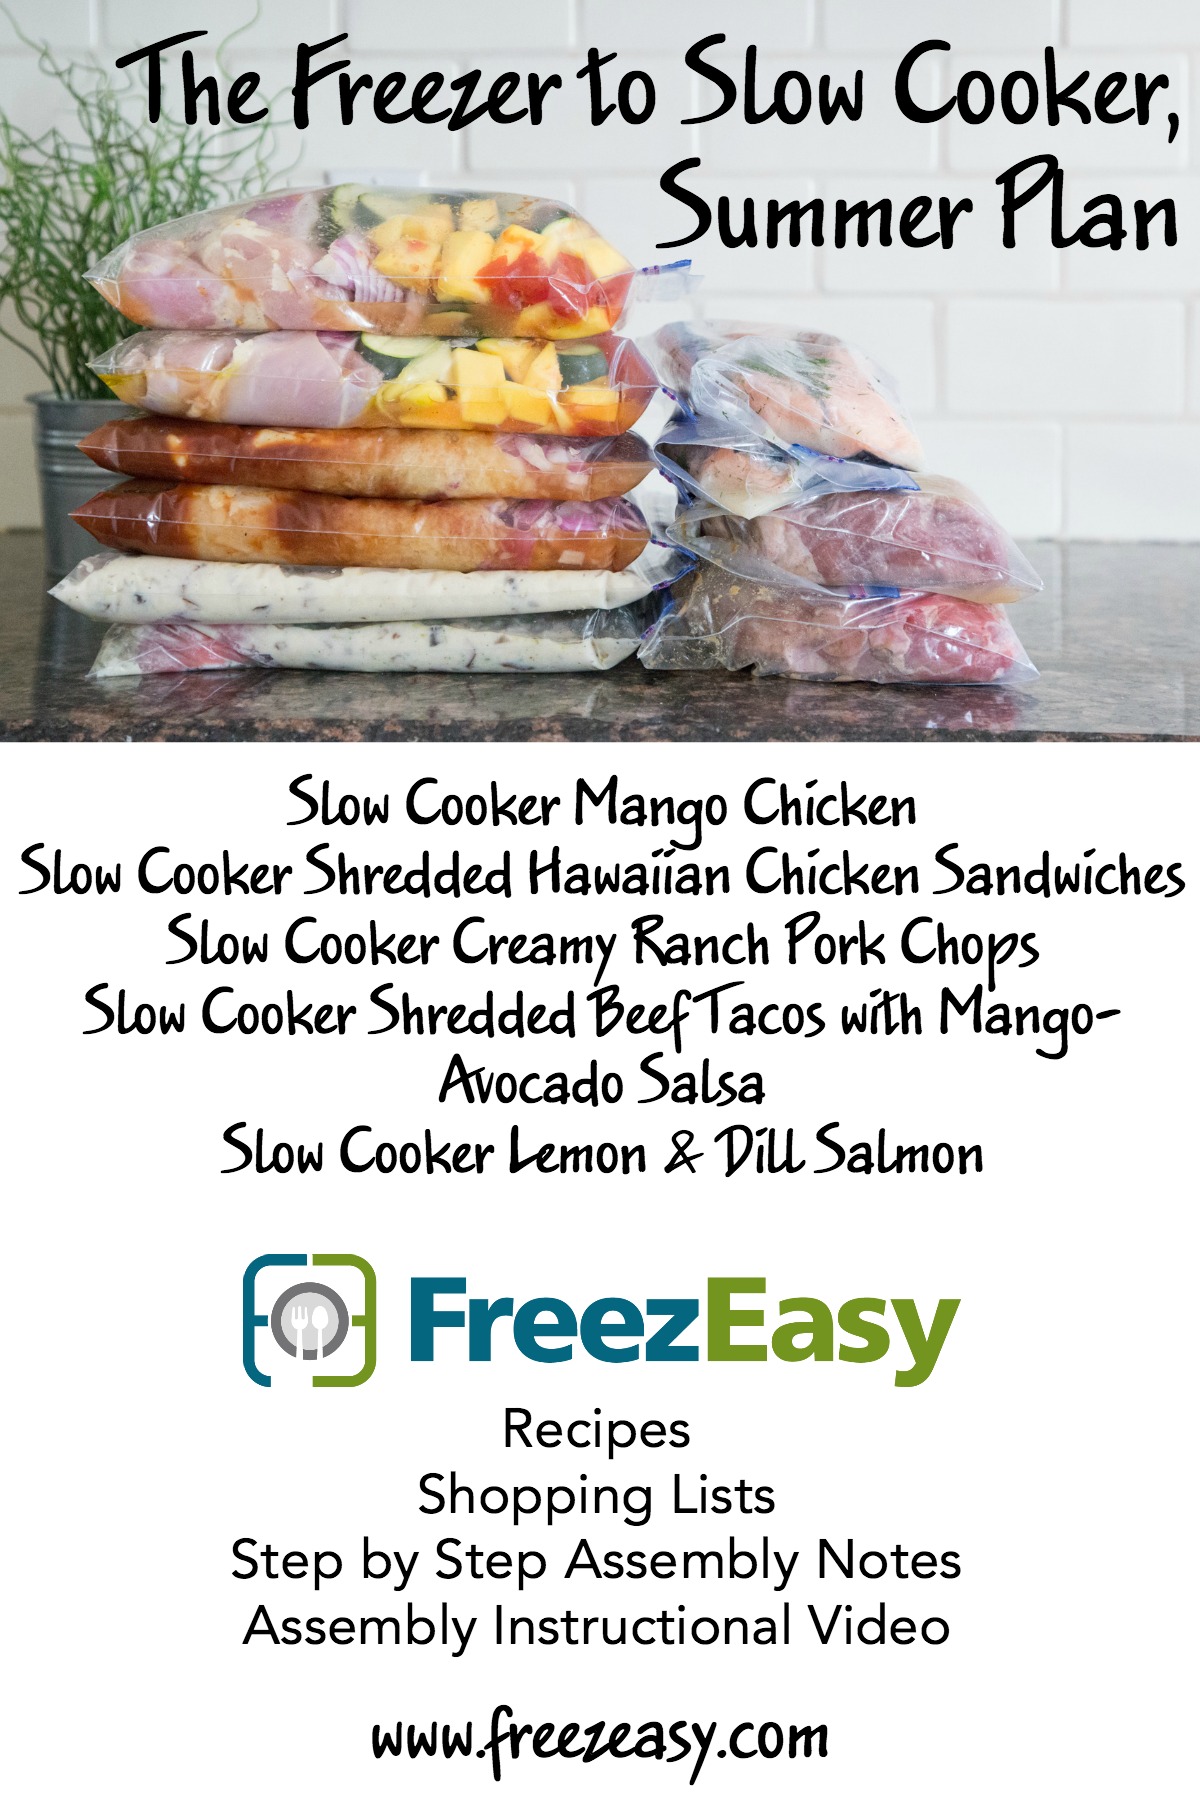 New Summer Freezer Cooking Meal Plans from FreezEasy